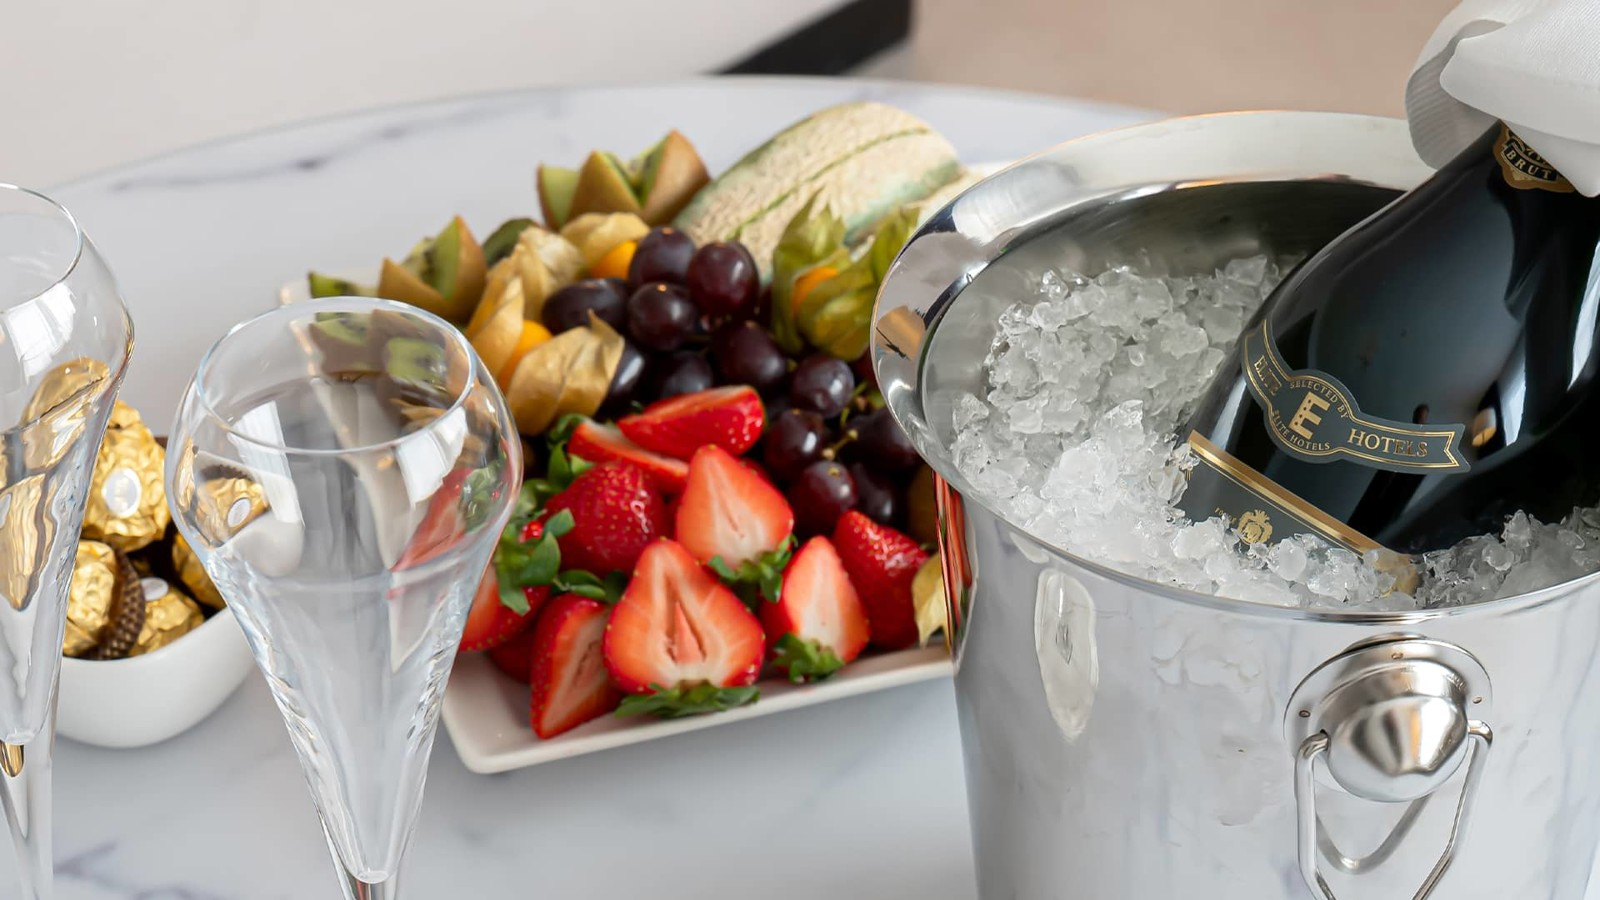 Champagne in an ice bucket, two glasses, chocolate and fruit platter on display